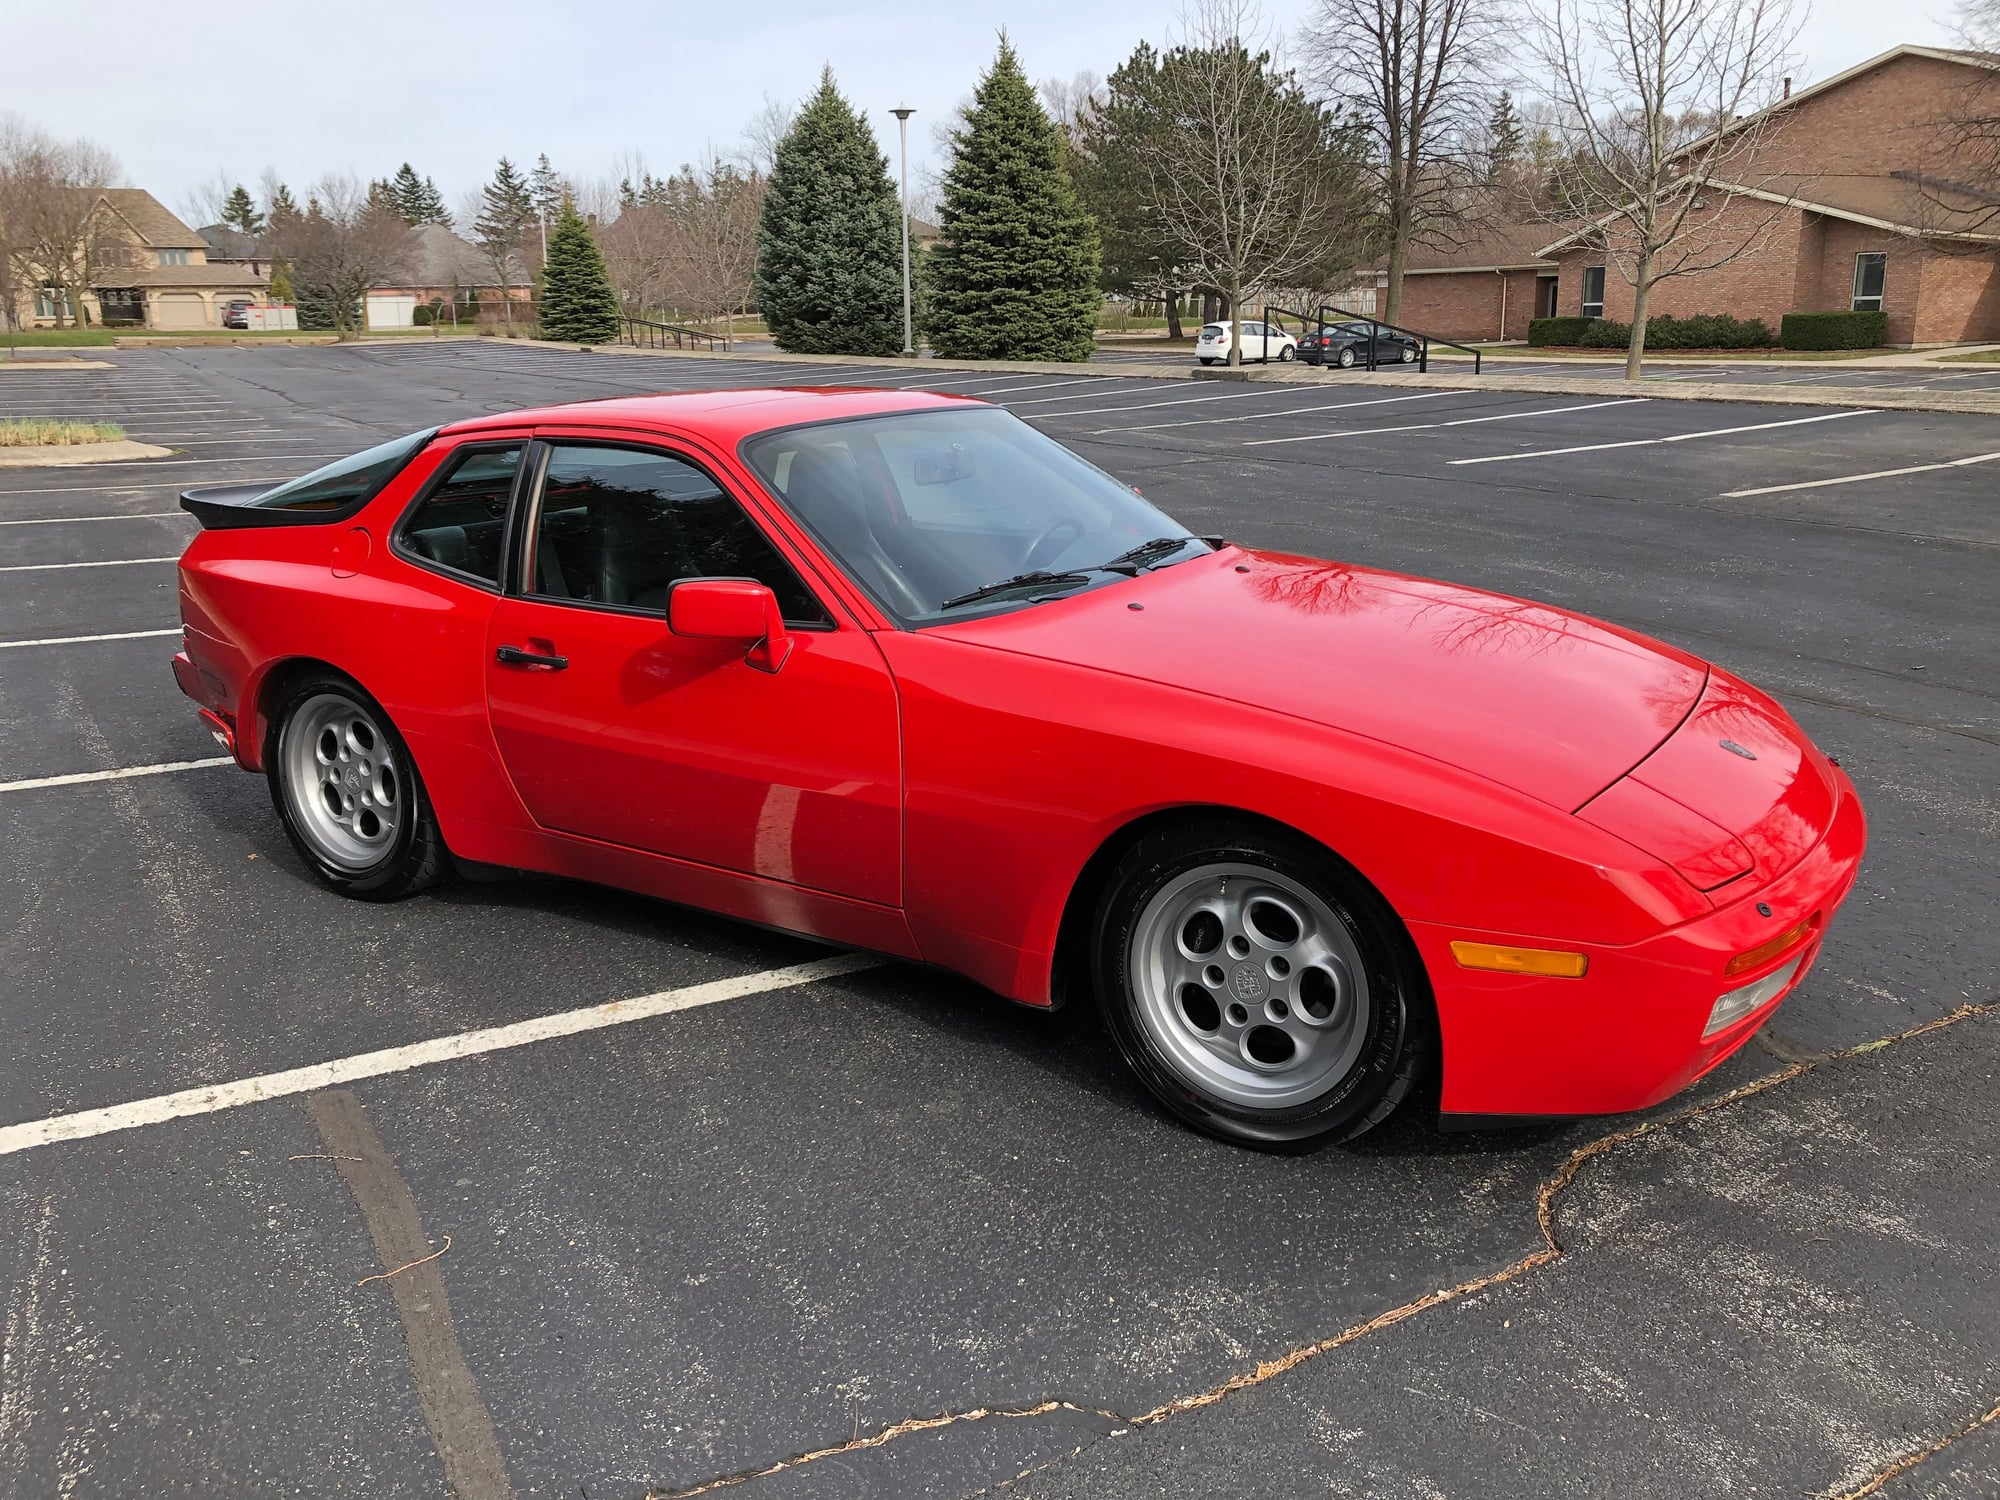 1986 Porsche 944 - 1986 Porsche 944 Turbo - Used - VIN WP0AA0951GN150244 - 107,000 Miles - 4 cyl - 2WD - Manual - Coupe - Red - London, ON N6K, Canada